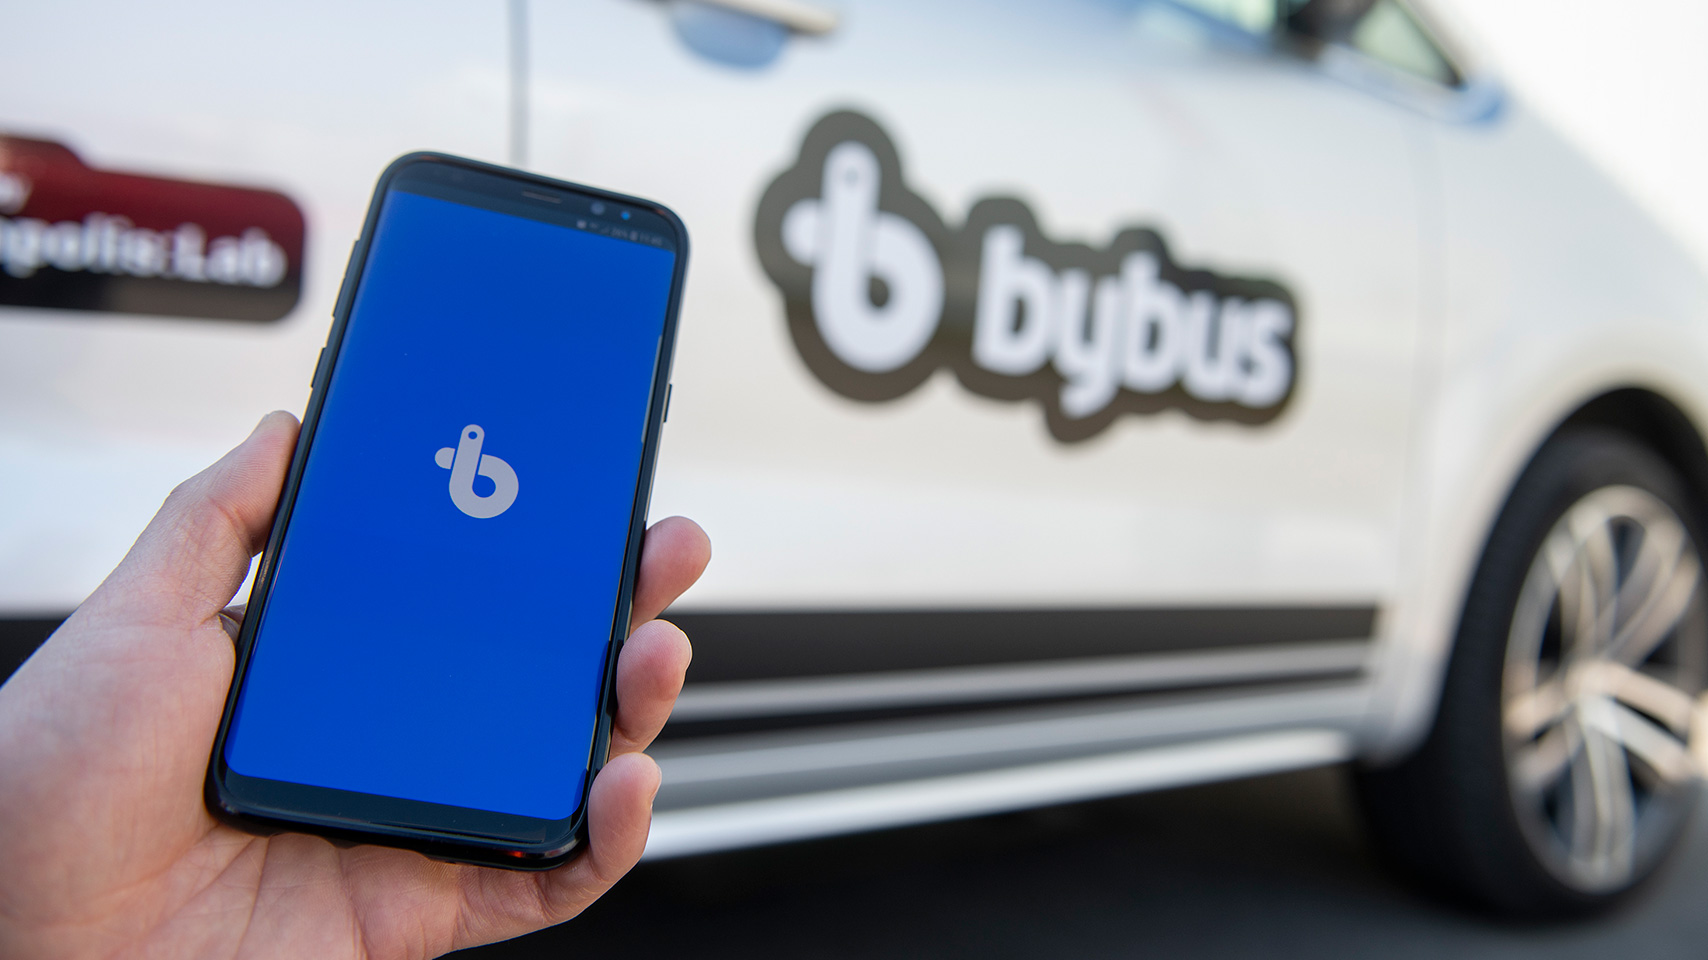 SEAT employee ordering a ride with the ByBus mobile app